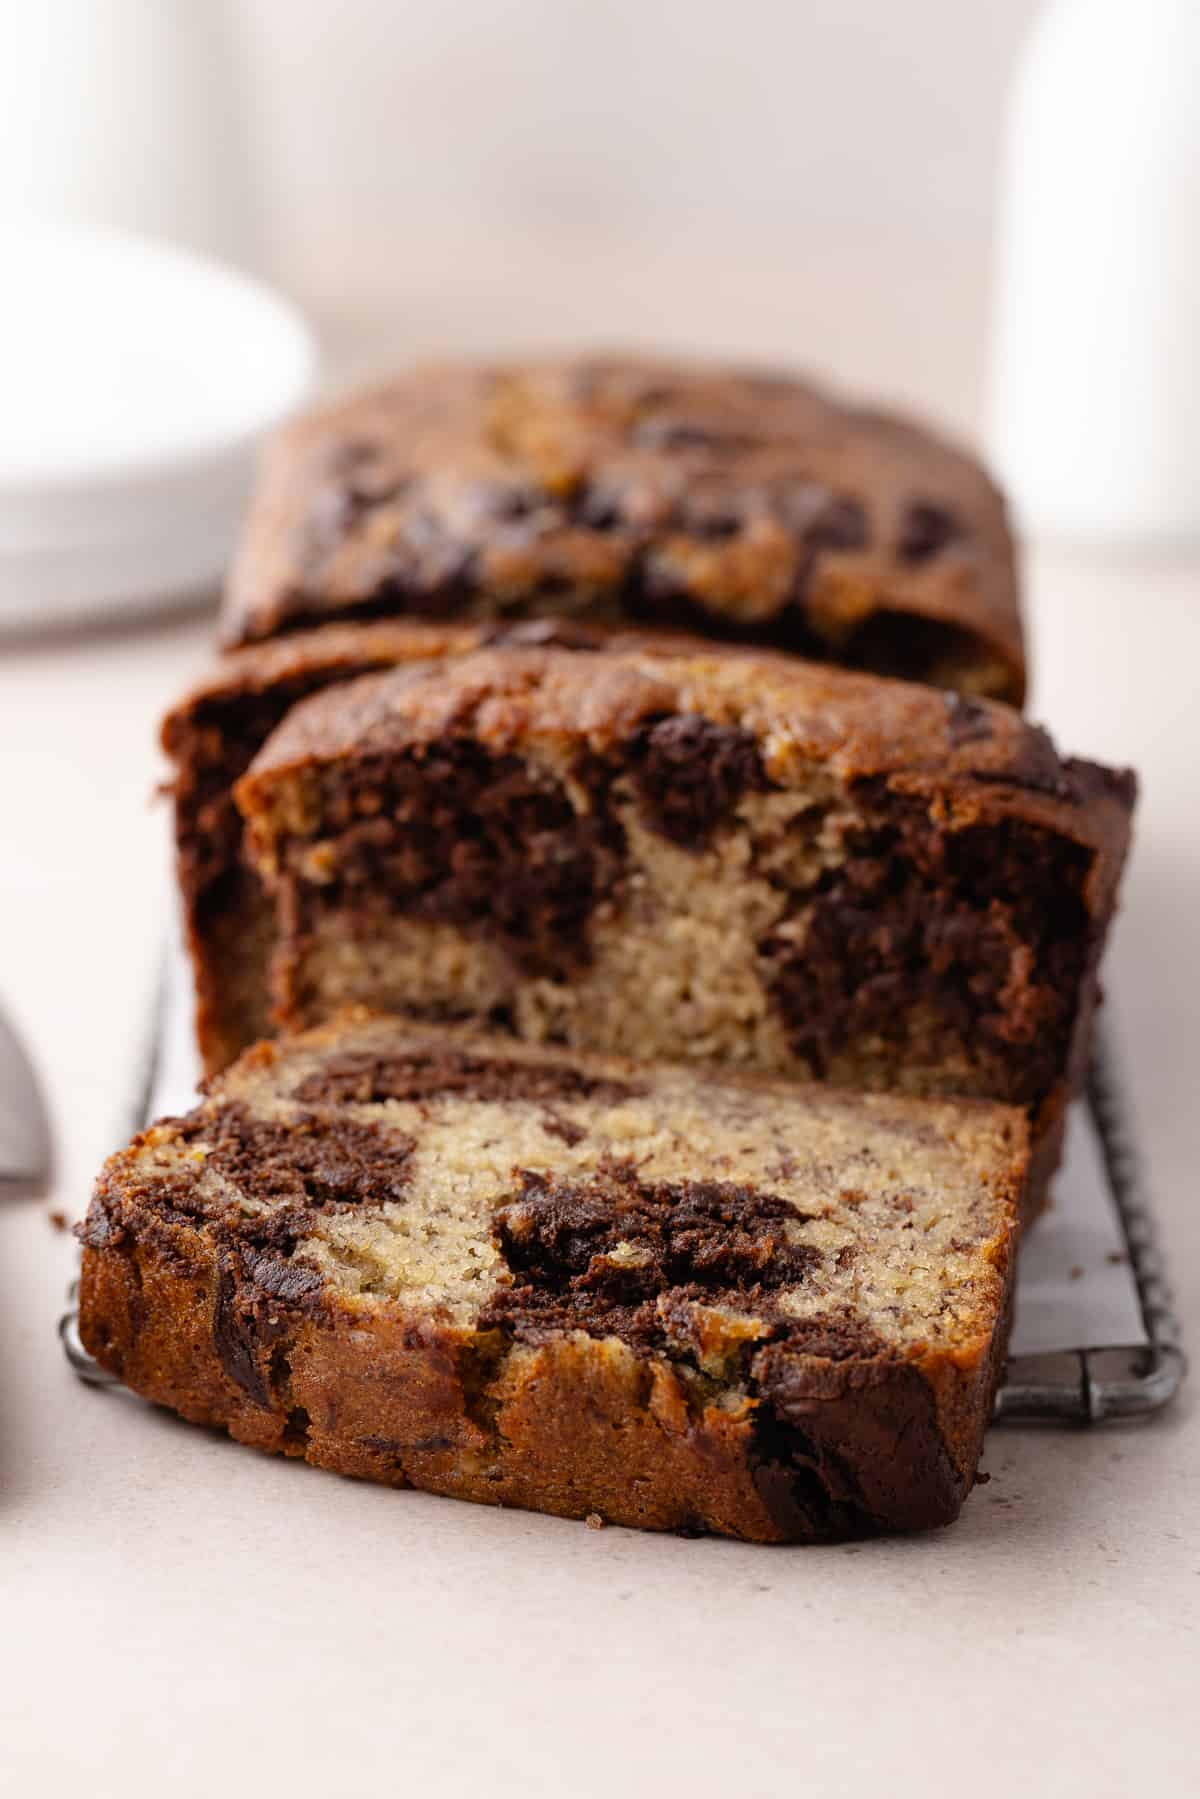 Chocolate marbled banana bread sliced on wire rack.